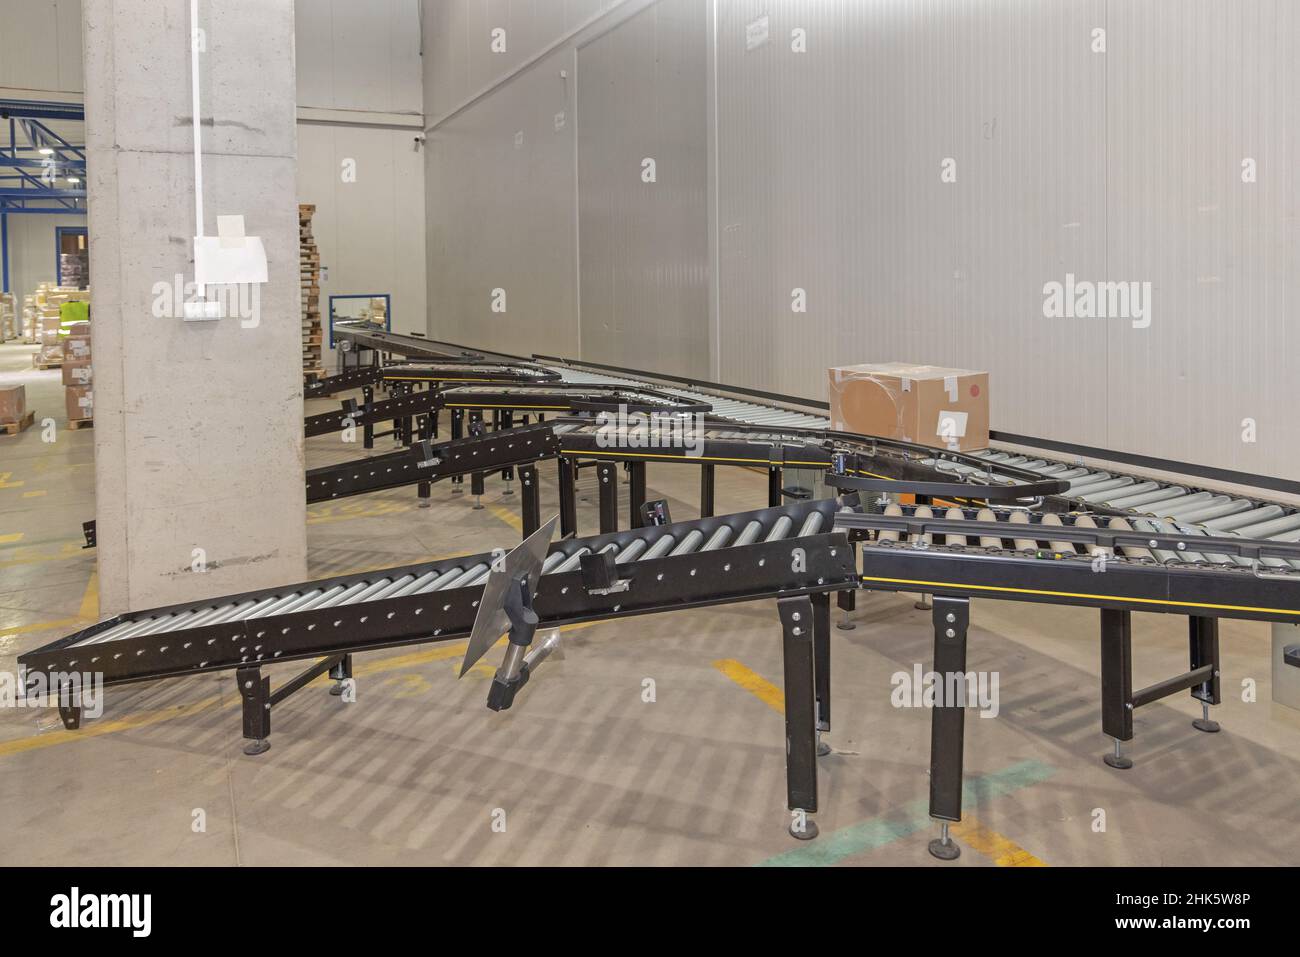 Long Conveyor Sorting Rollers in Distribution Warehouse Stock Photo